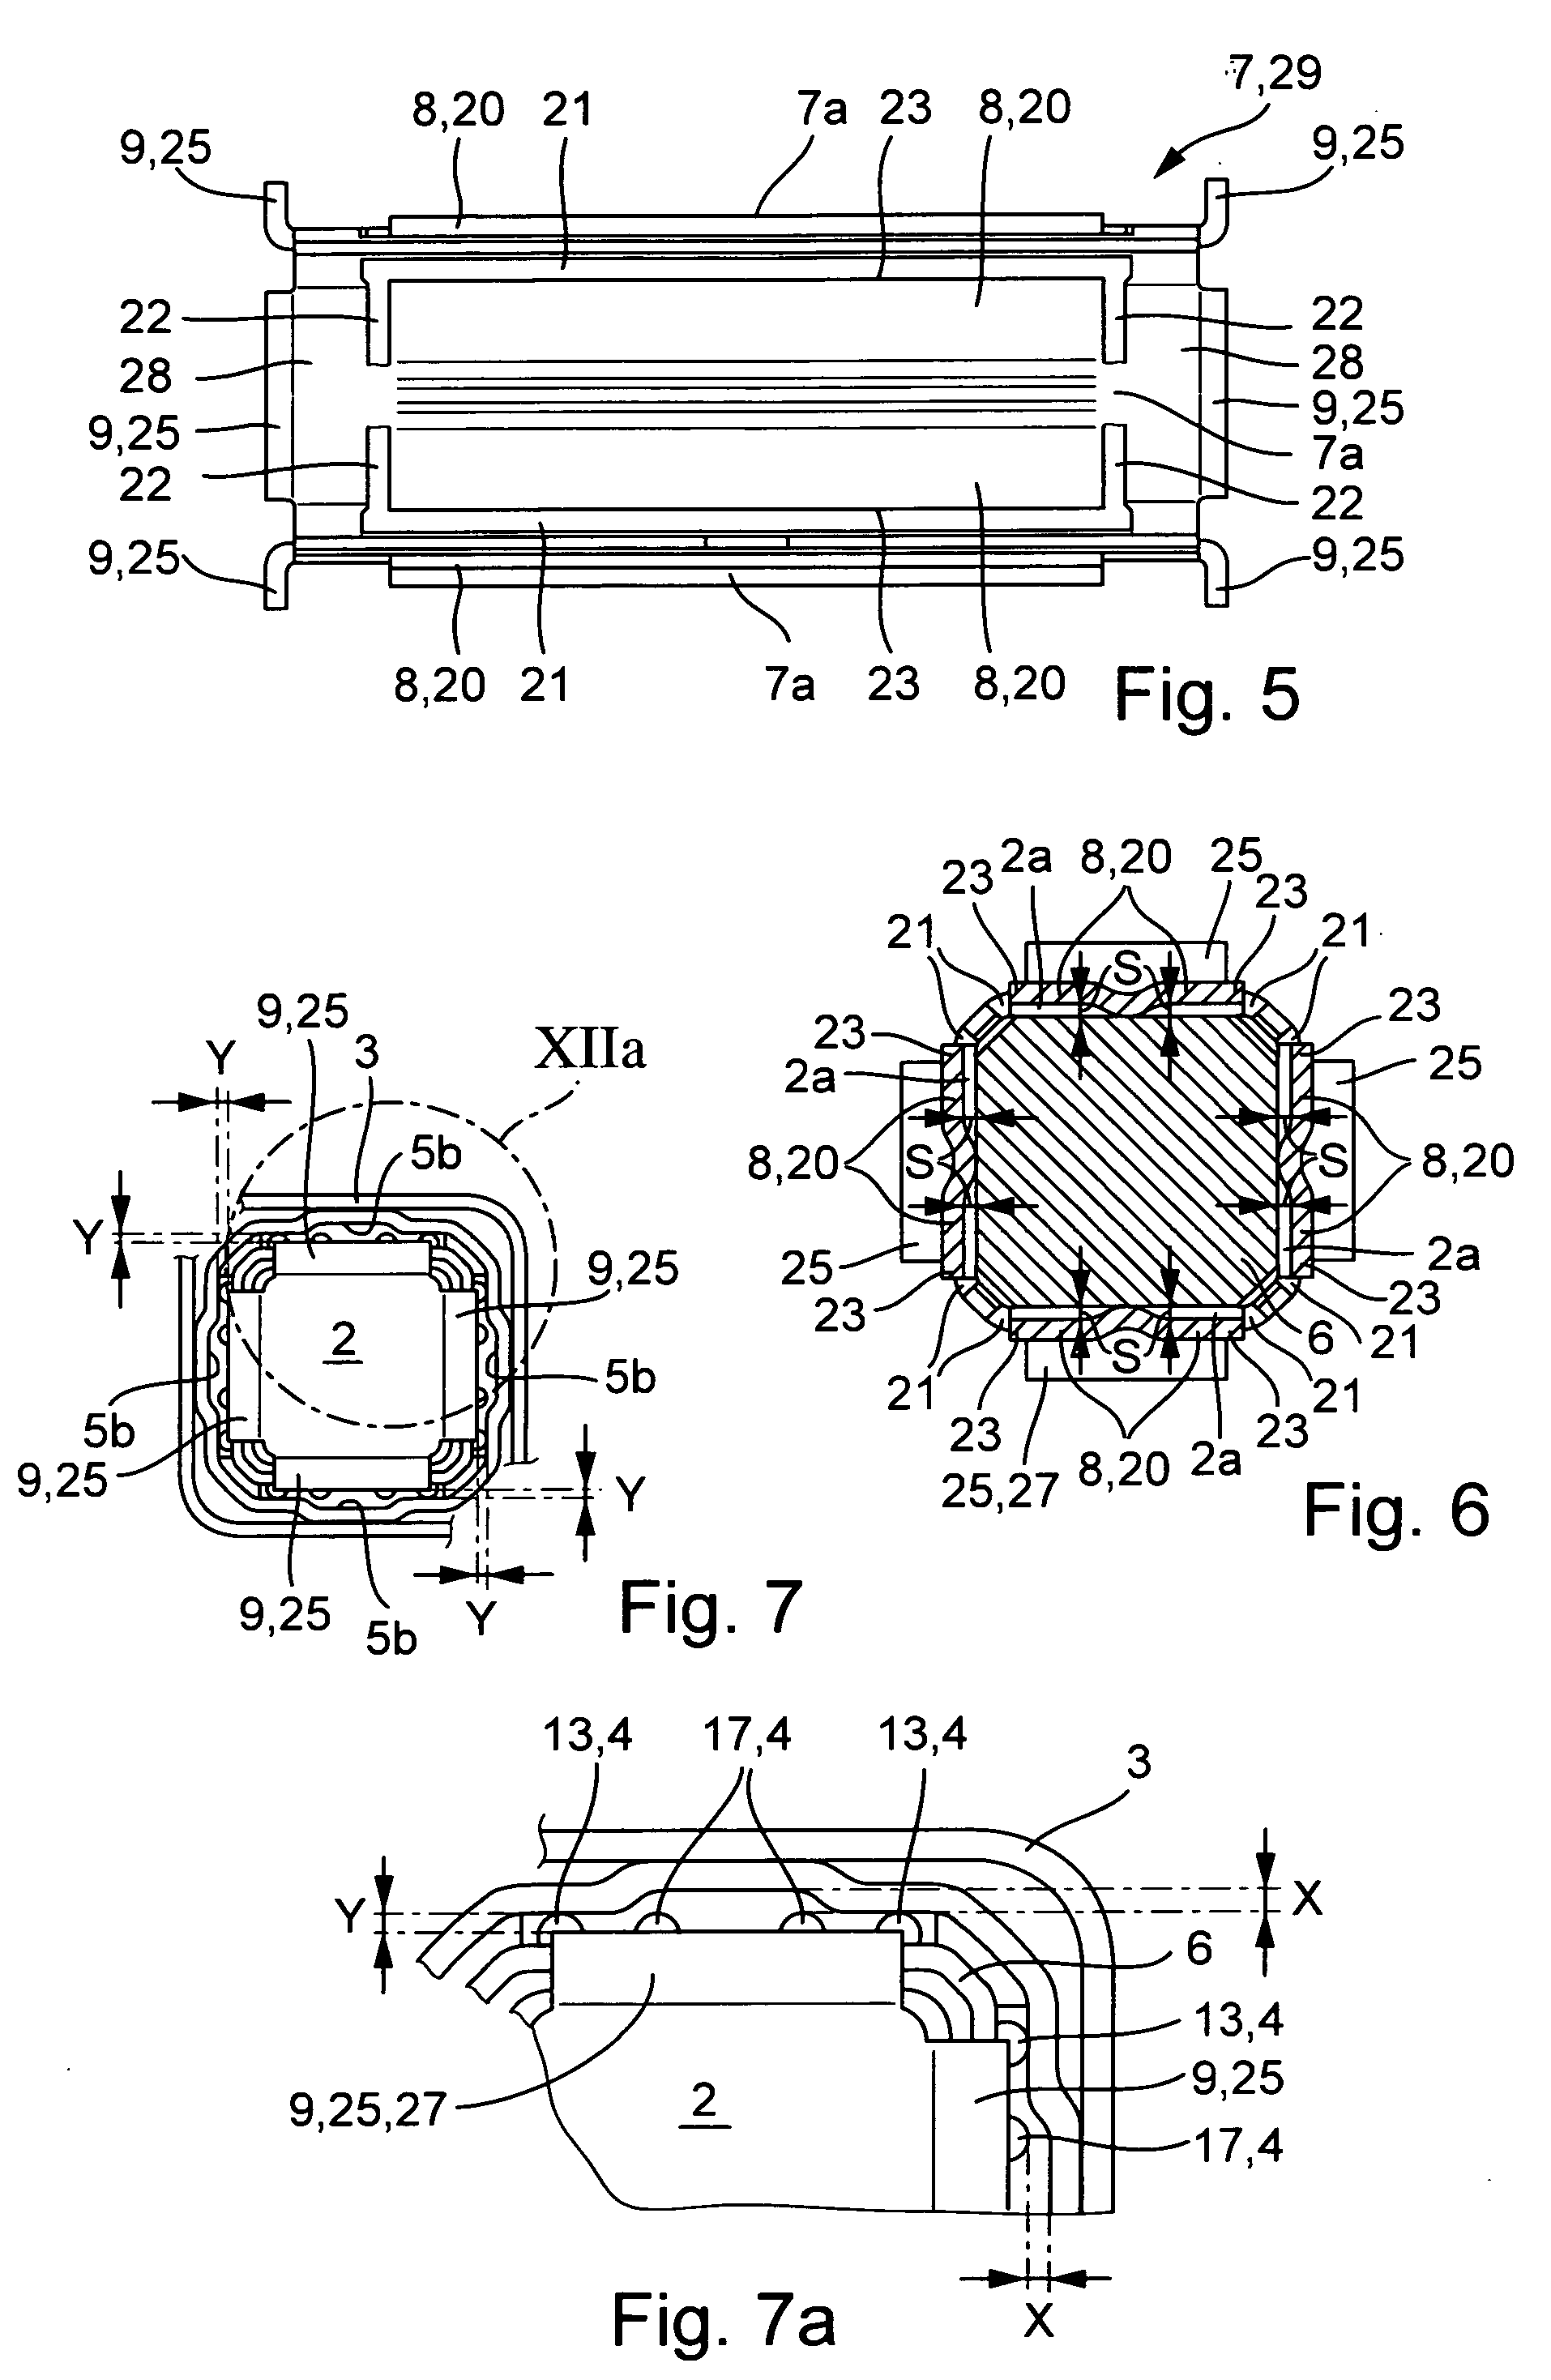 Bearing of a telescopic connection